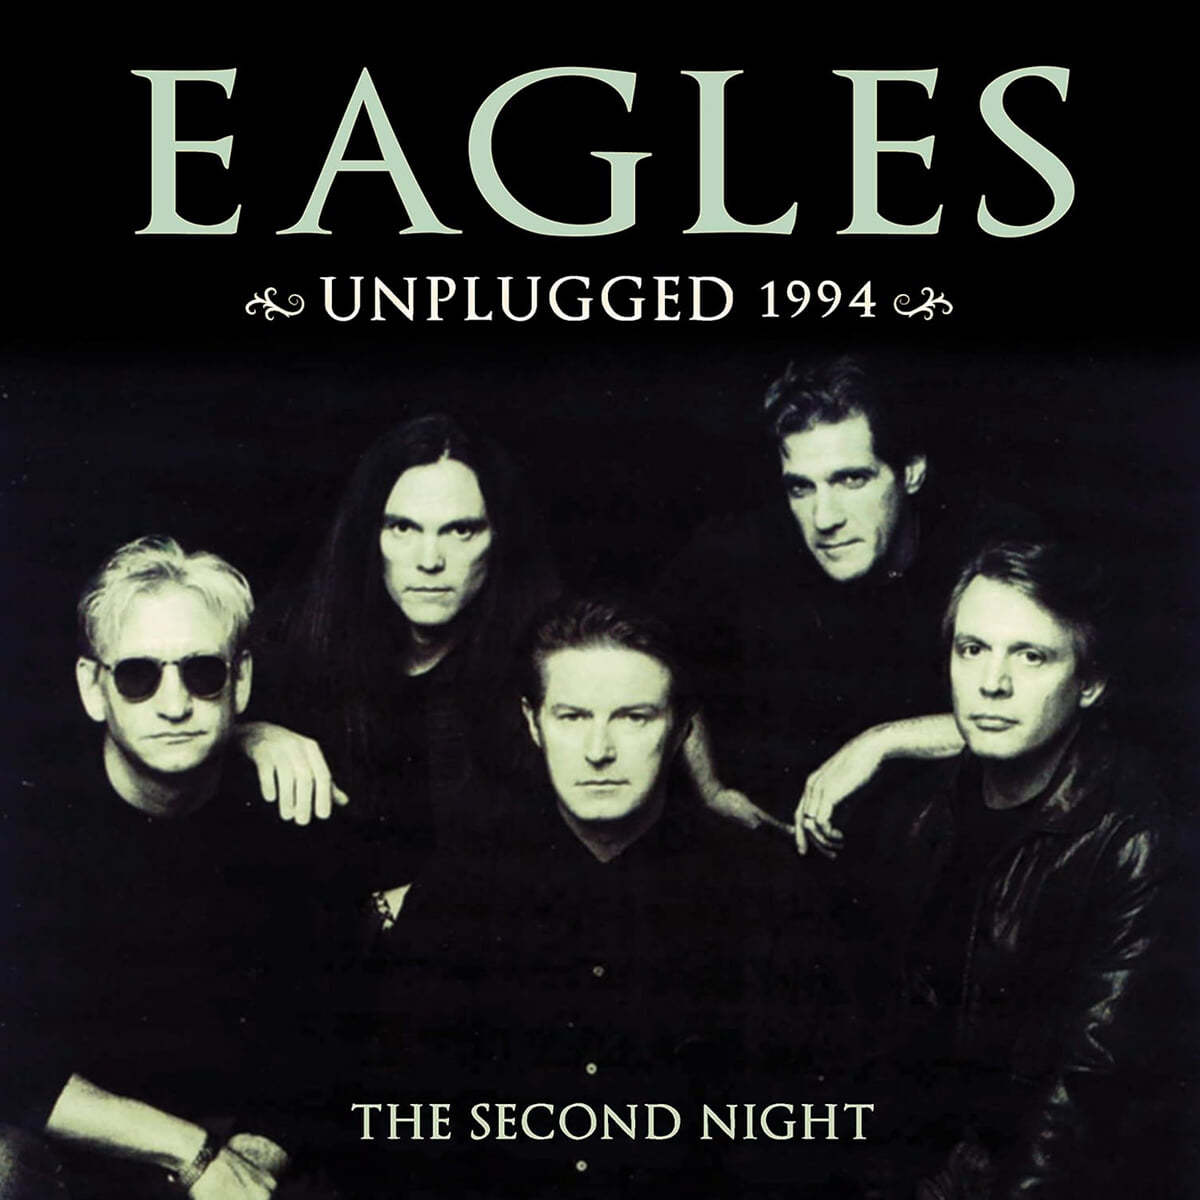 Eagles (이글스) - Unplugged 1994: The Second Night 